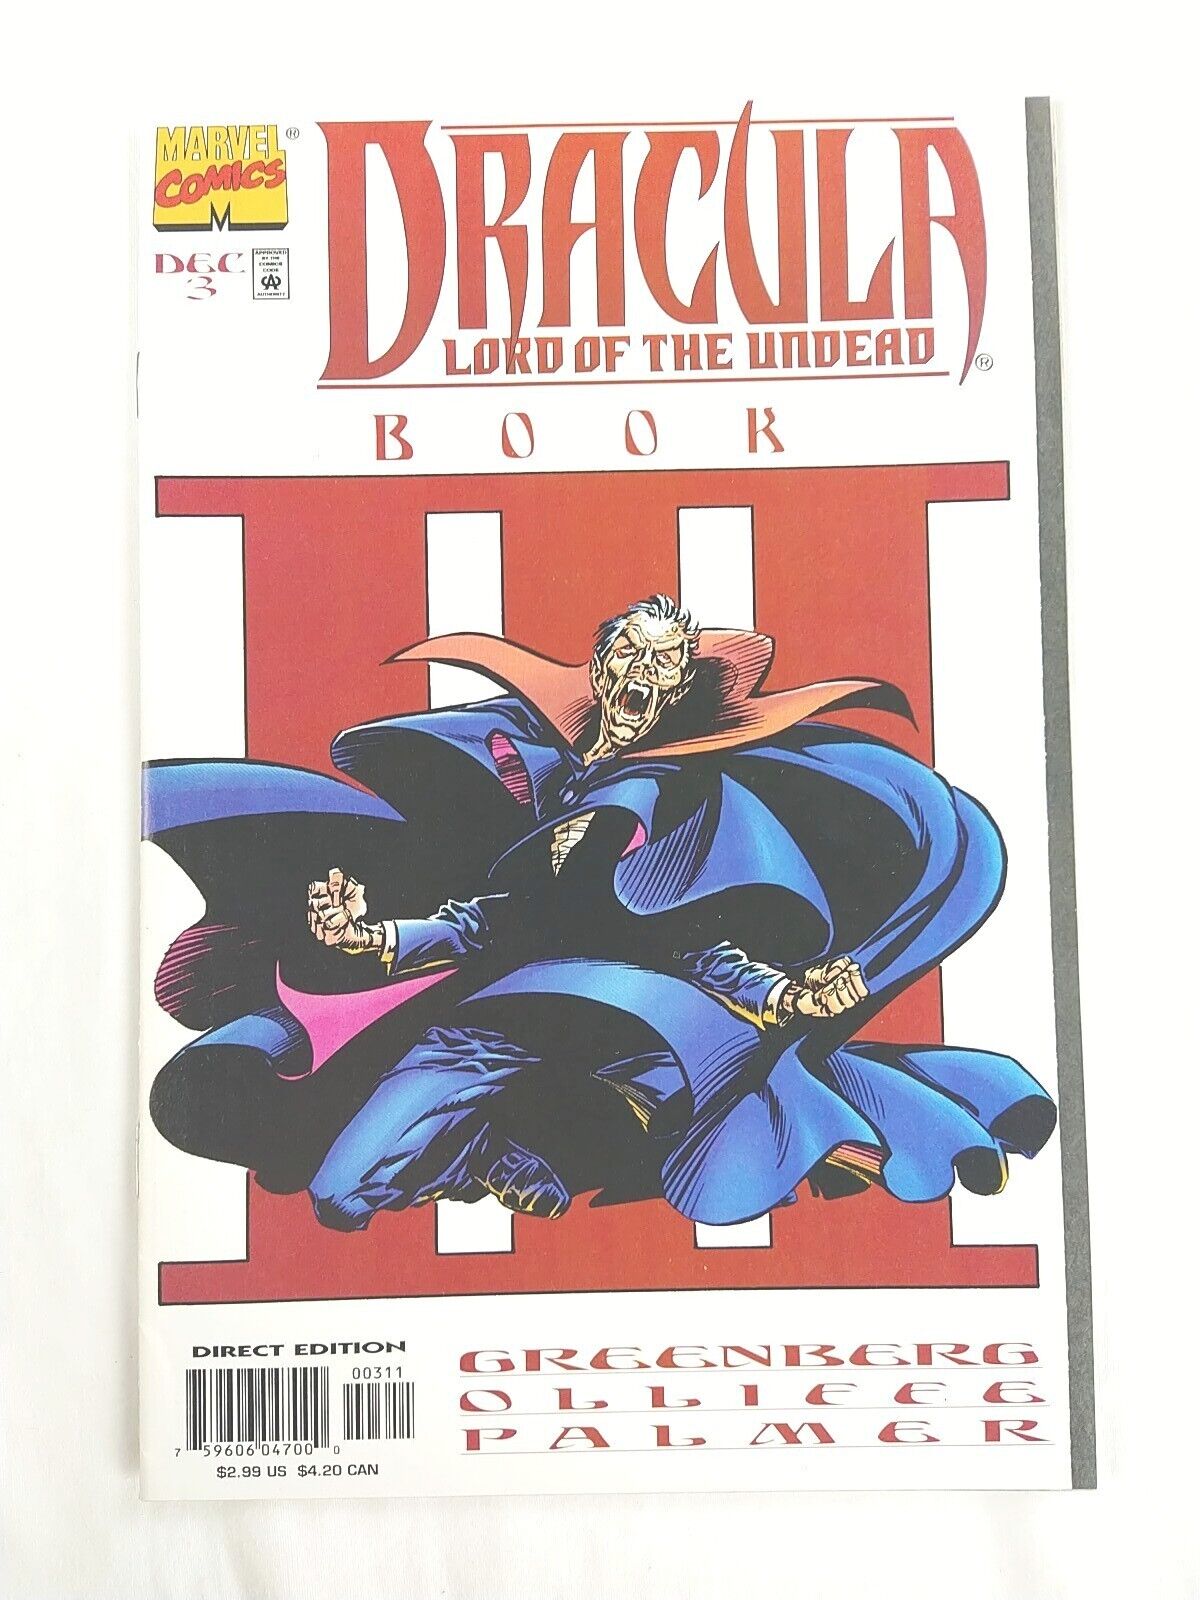 Dracula: Lord of the Undead #3 Book Three (1998 Marvel Comics) See Other Comics